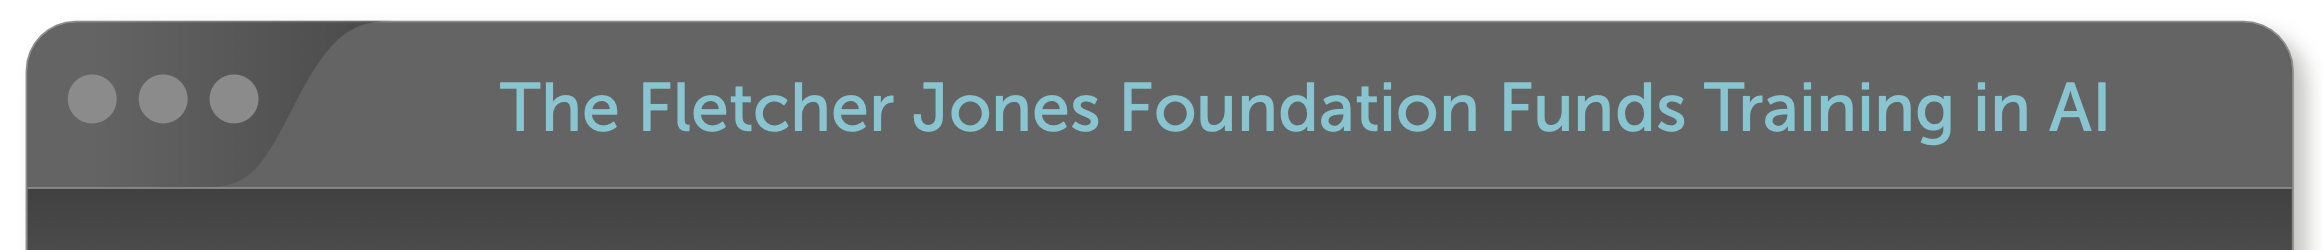 Title bar reads "The Fletcher Jones Foundation Funds Training in AI"